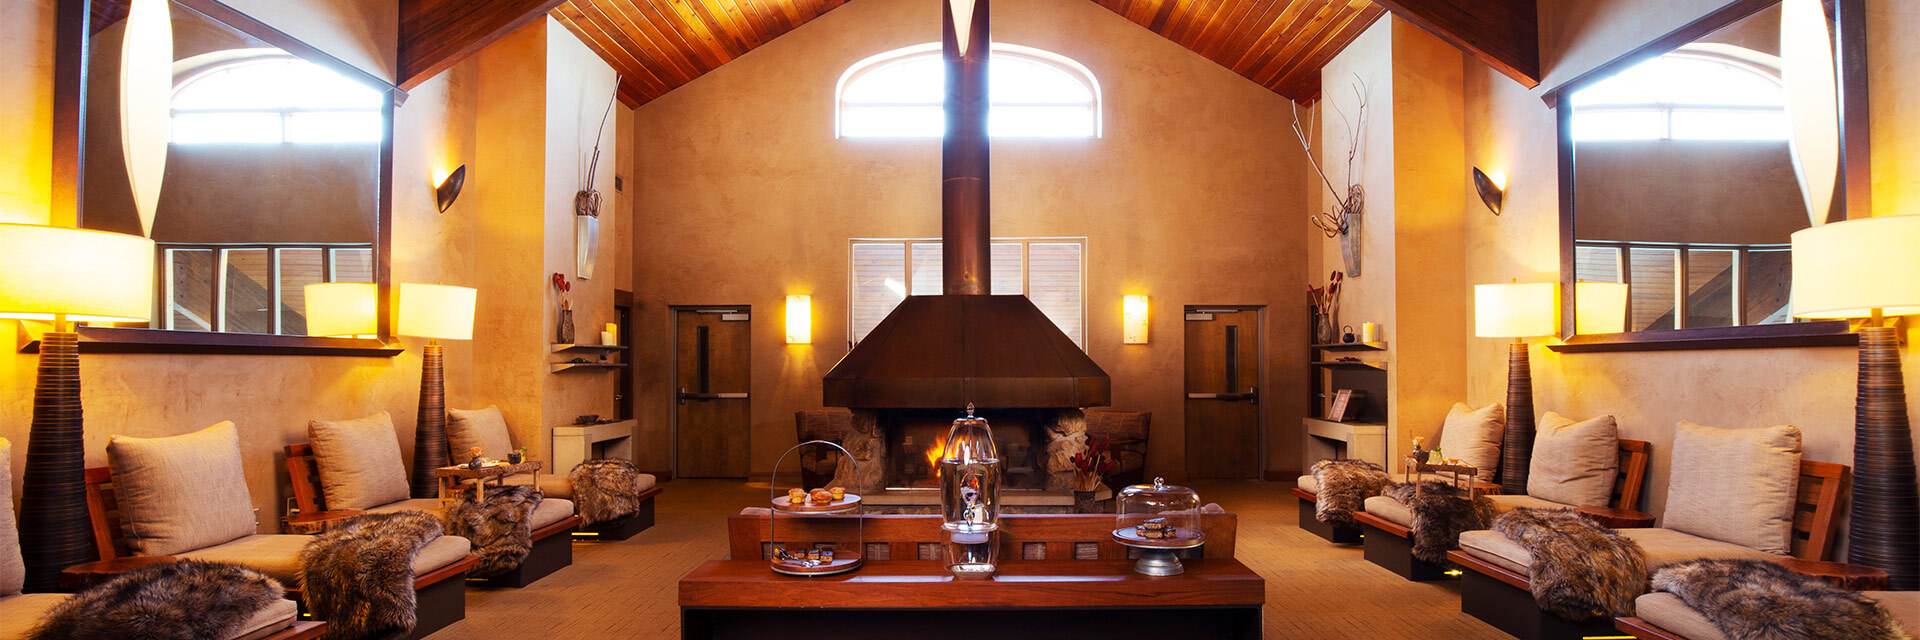 large room with seating on either side and a table in the middle and fireplace in the back, dimly lit